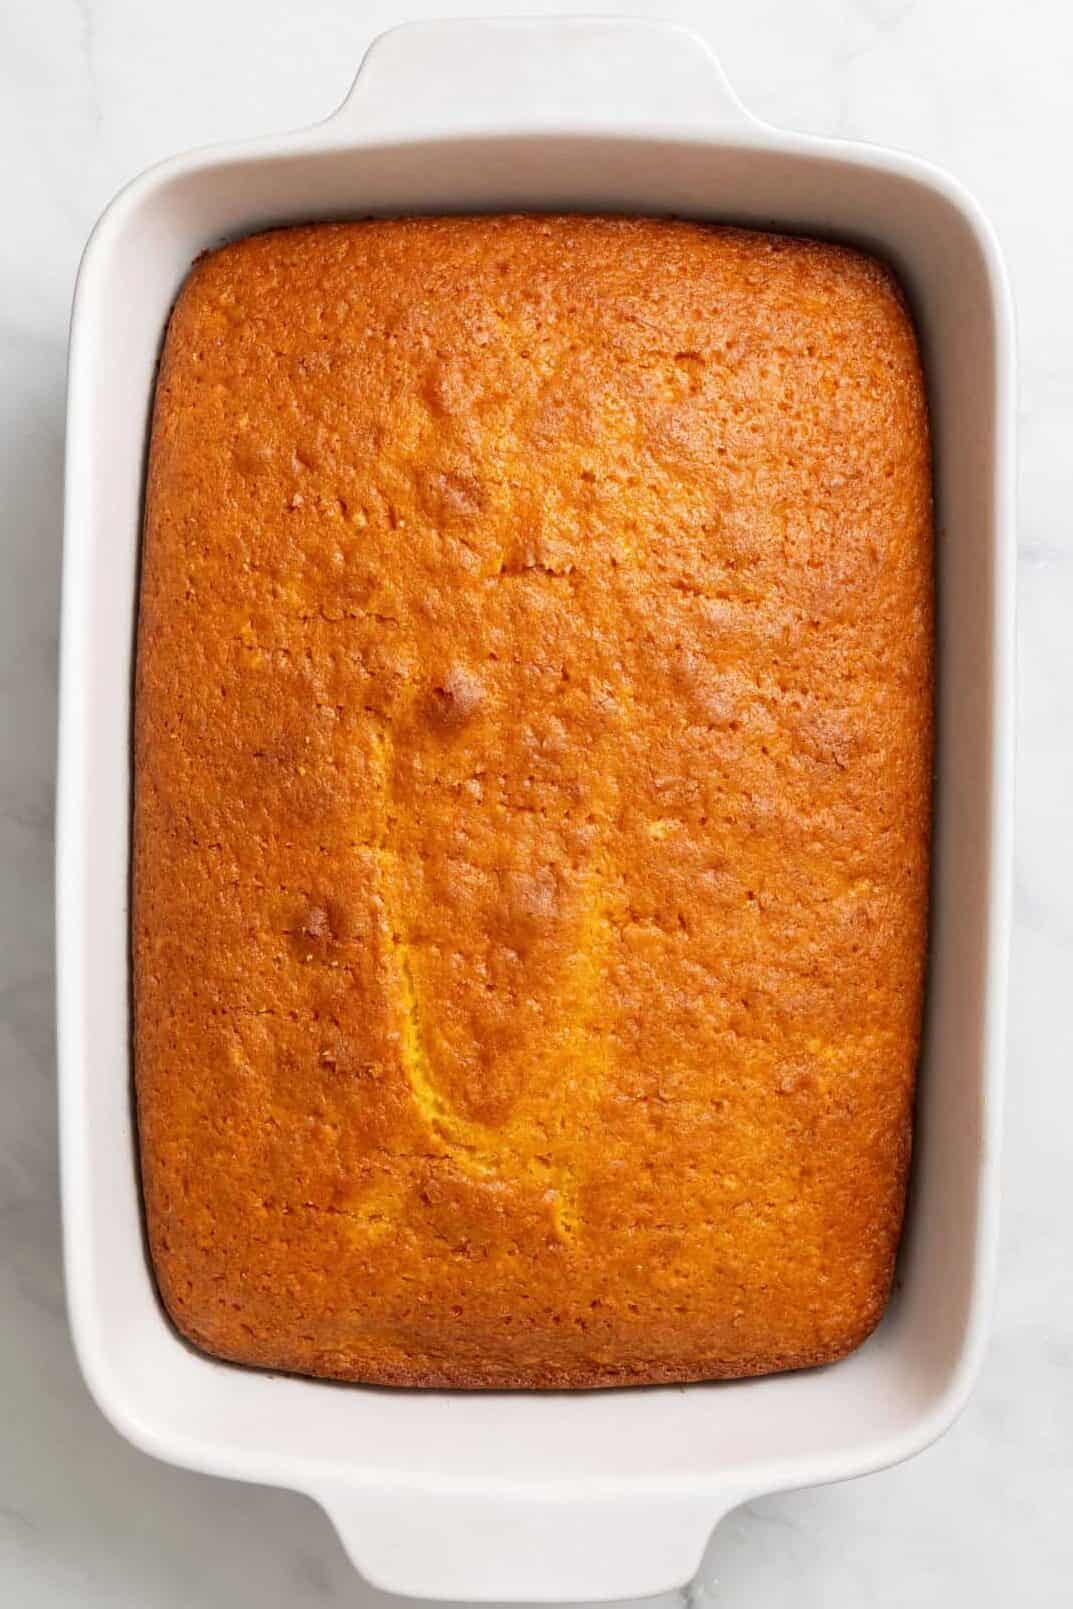 Top down image of a 9 x 13 casserole dish with baked lemon cake.